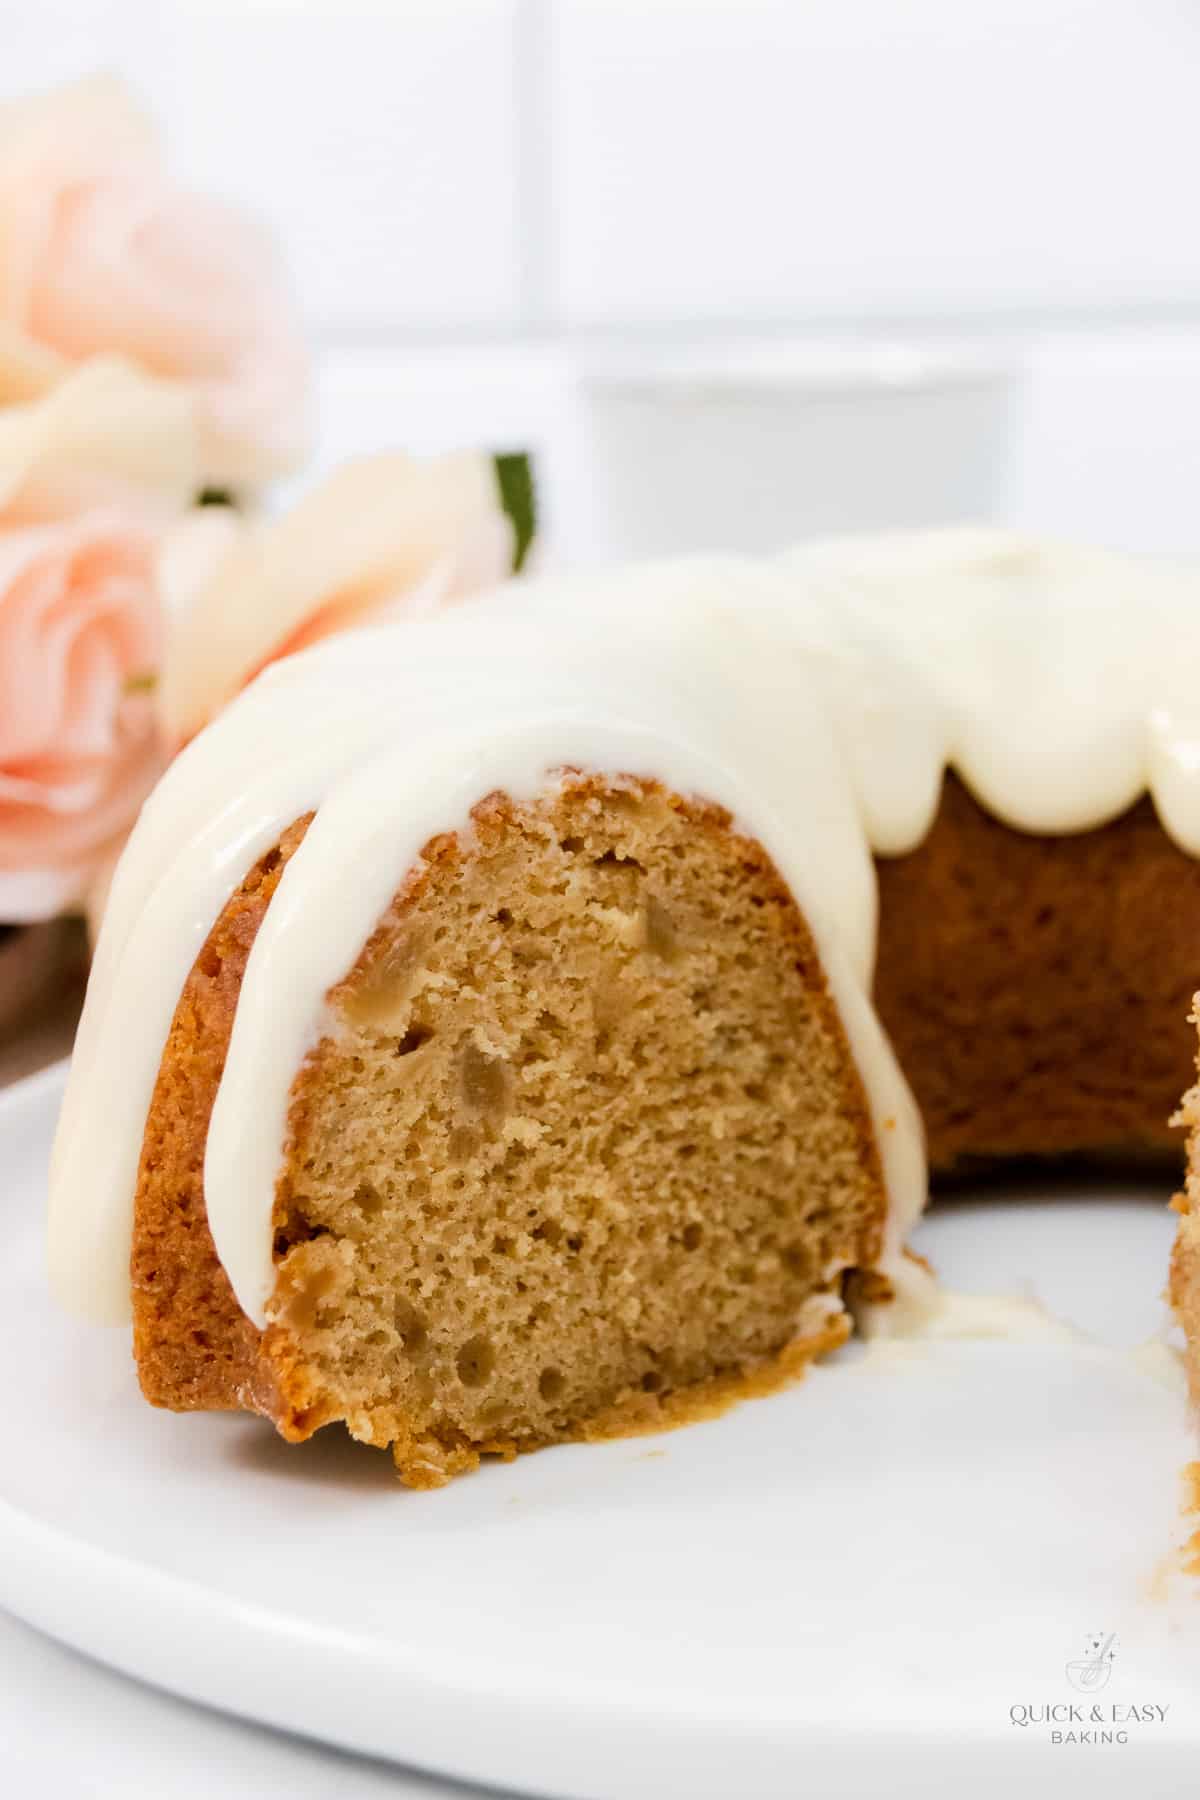 Side angle of bundt cake with apples.